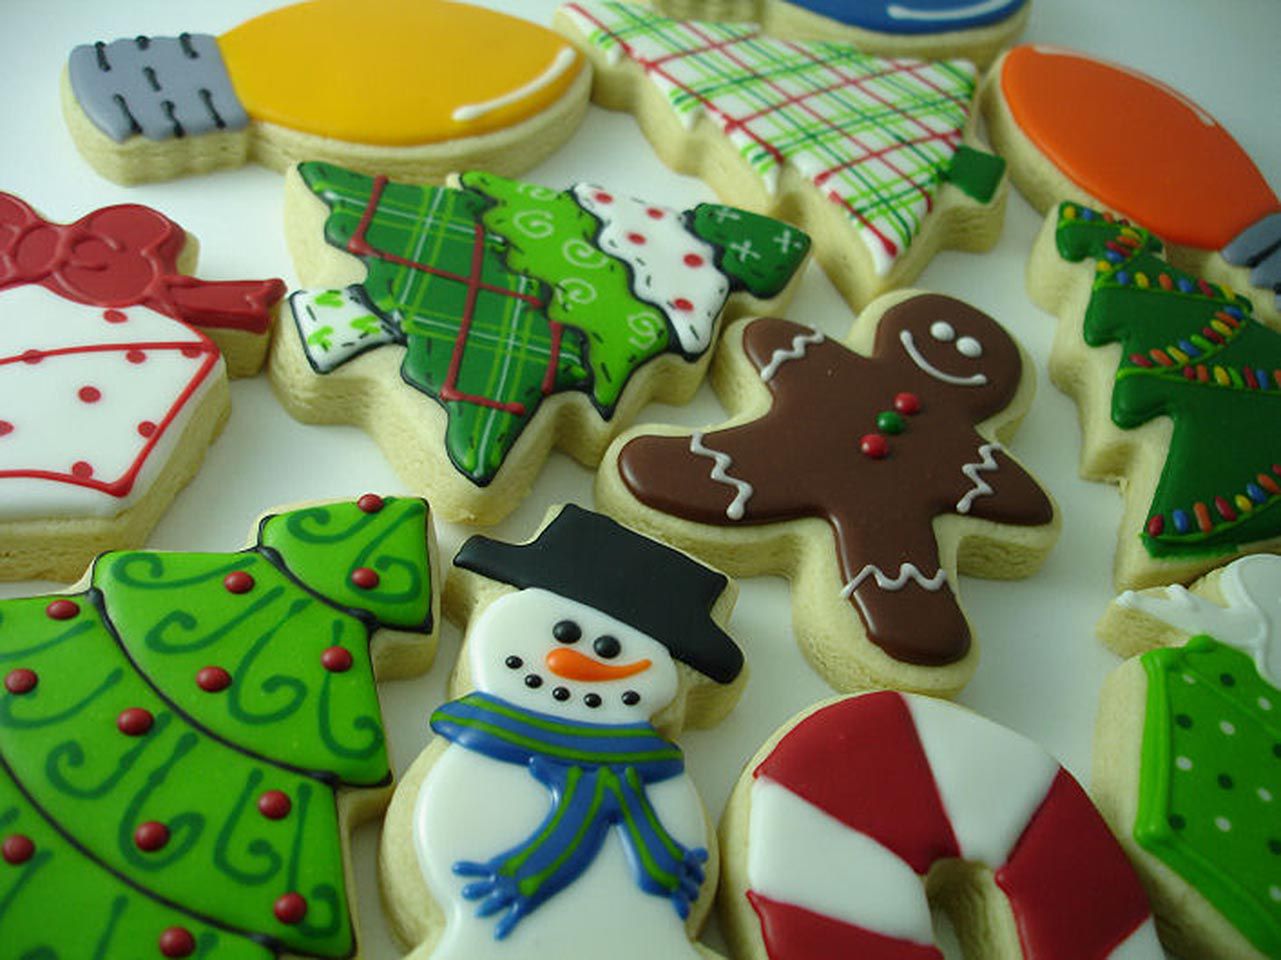 intricately decorated Christmas cookies: snowman, Christmas trees, gingerbread man, candy cane, and colored tree lights